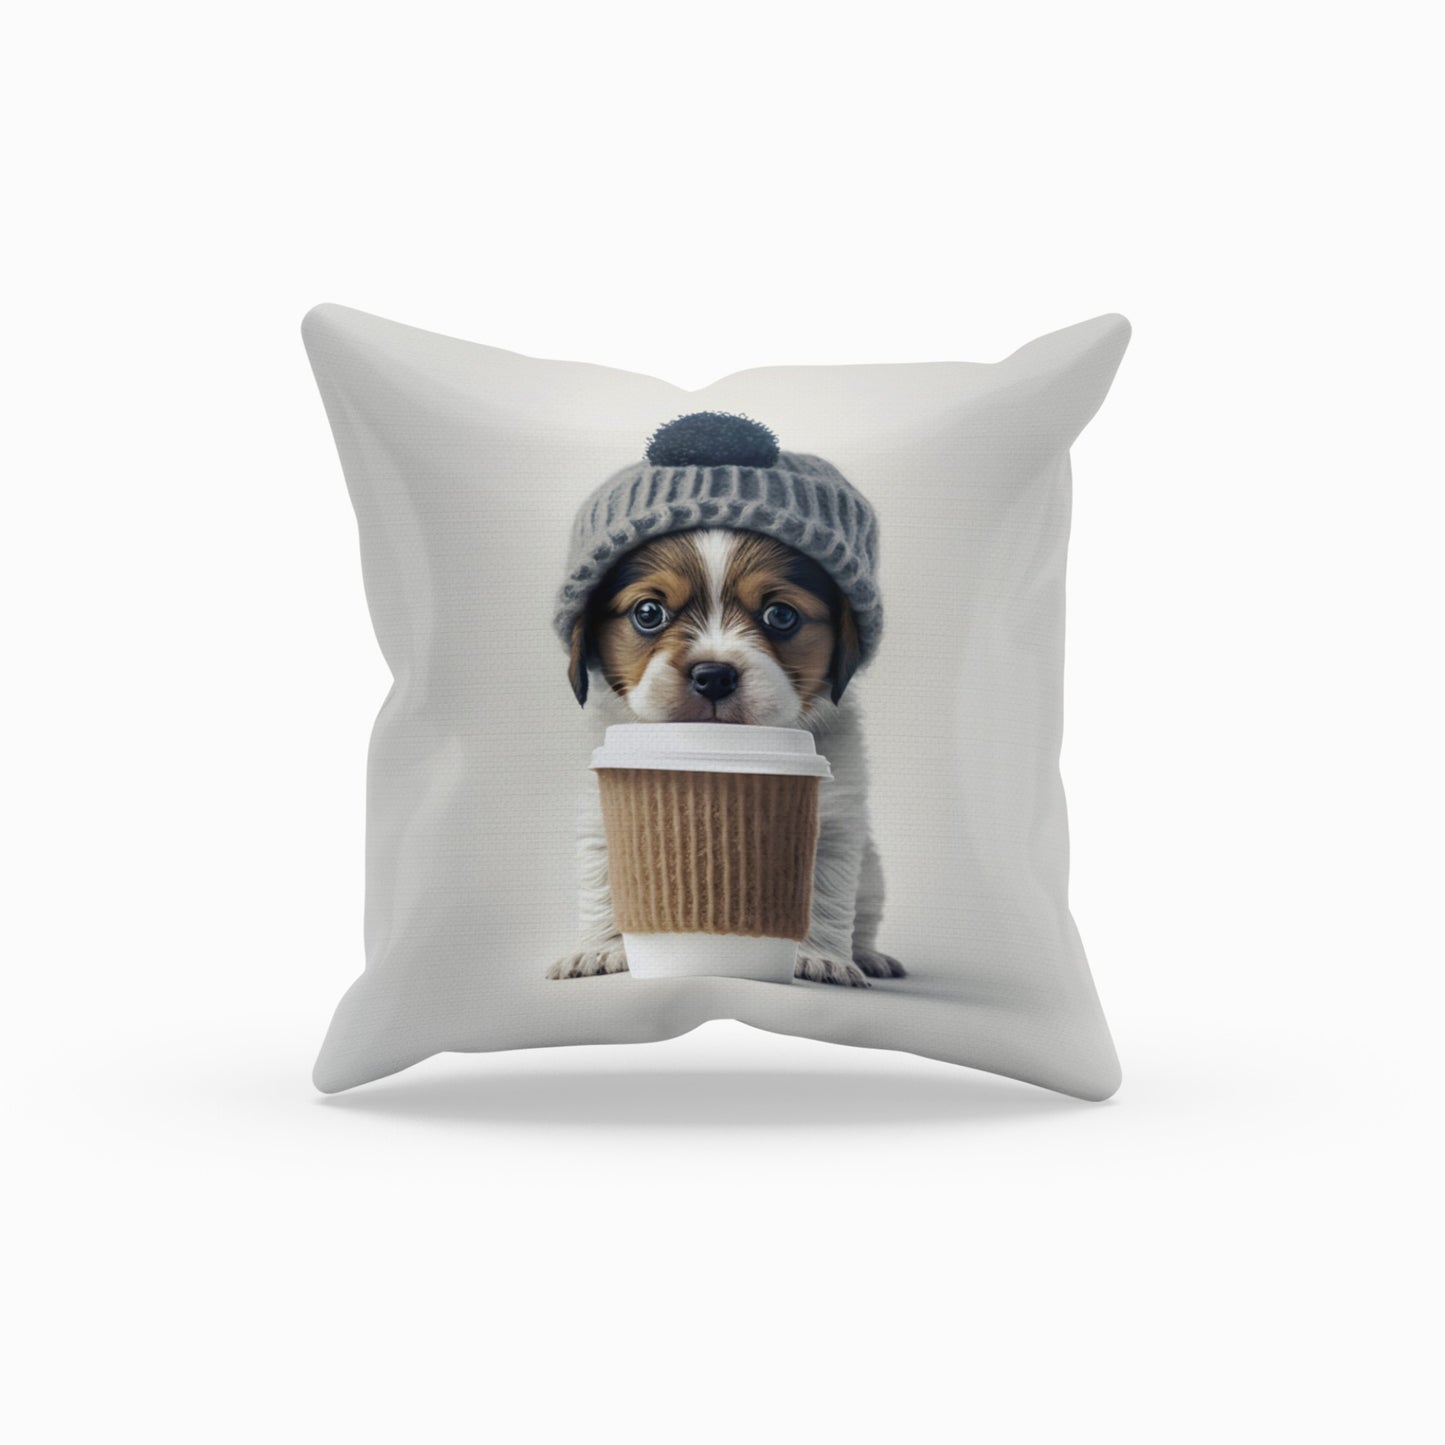 Charming Winter Pillow for Cozy Decor